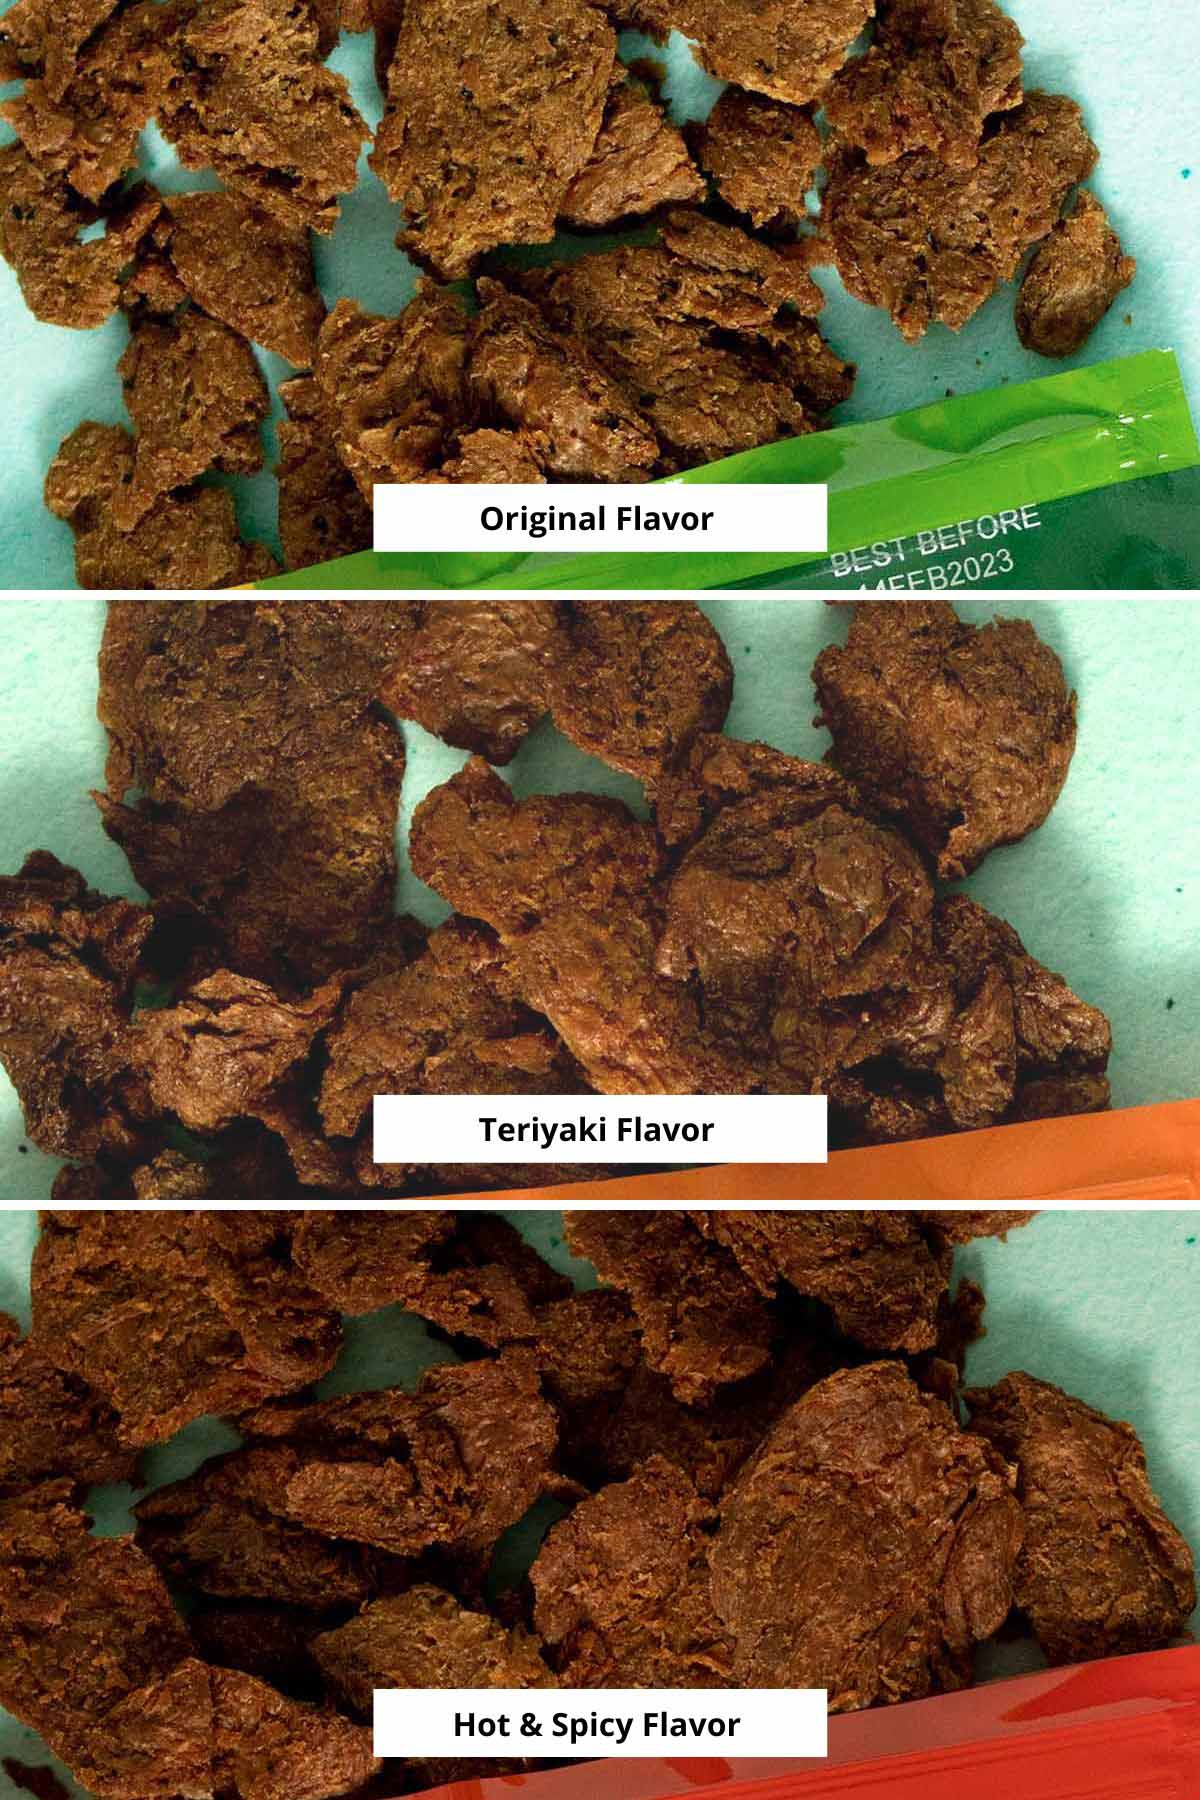 image collage showing close-ups of all 3 flavors of Beyond Meat Jerky: original, teriyaki, and hot & spicy